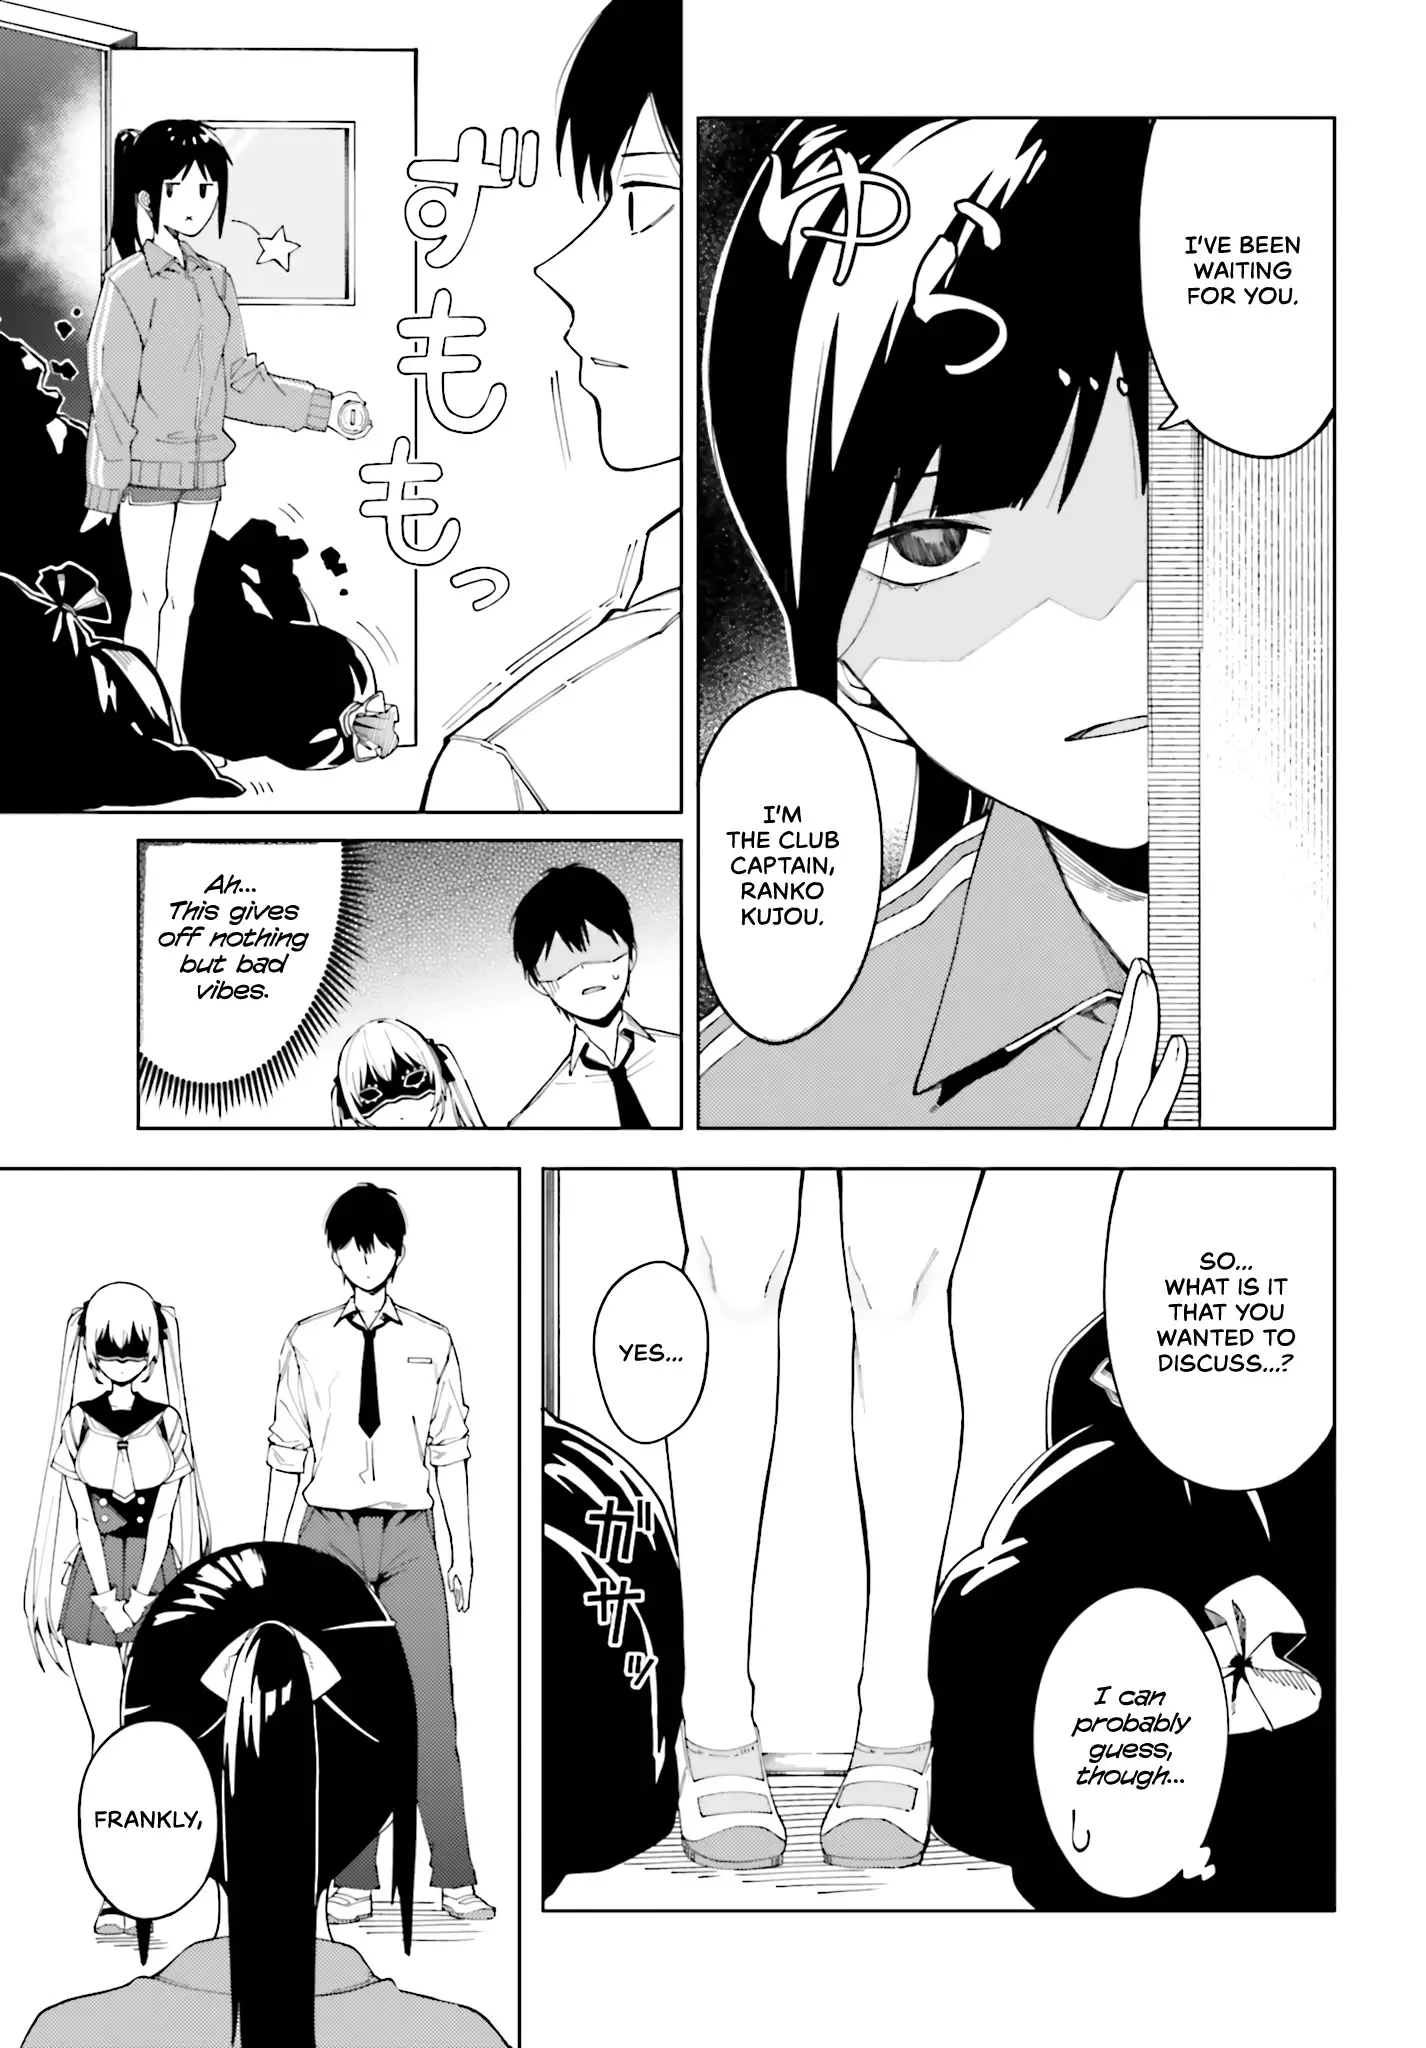 I Don't Understand Shirogane-San's Facial Expression At All - 1 page 12